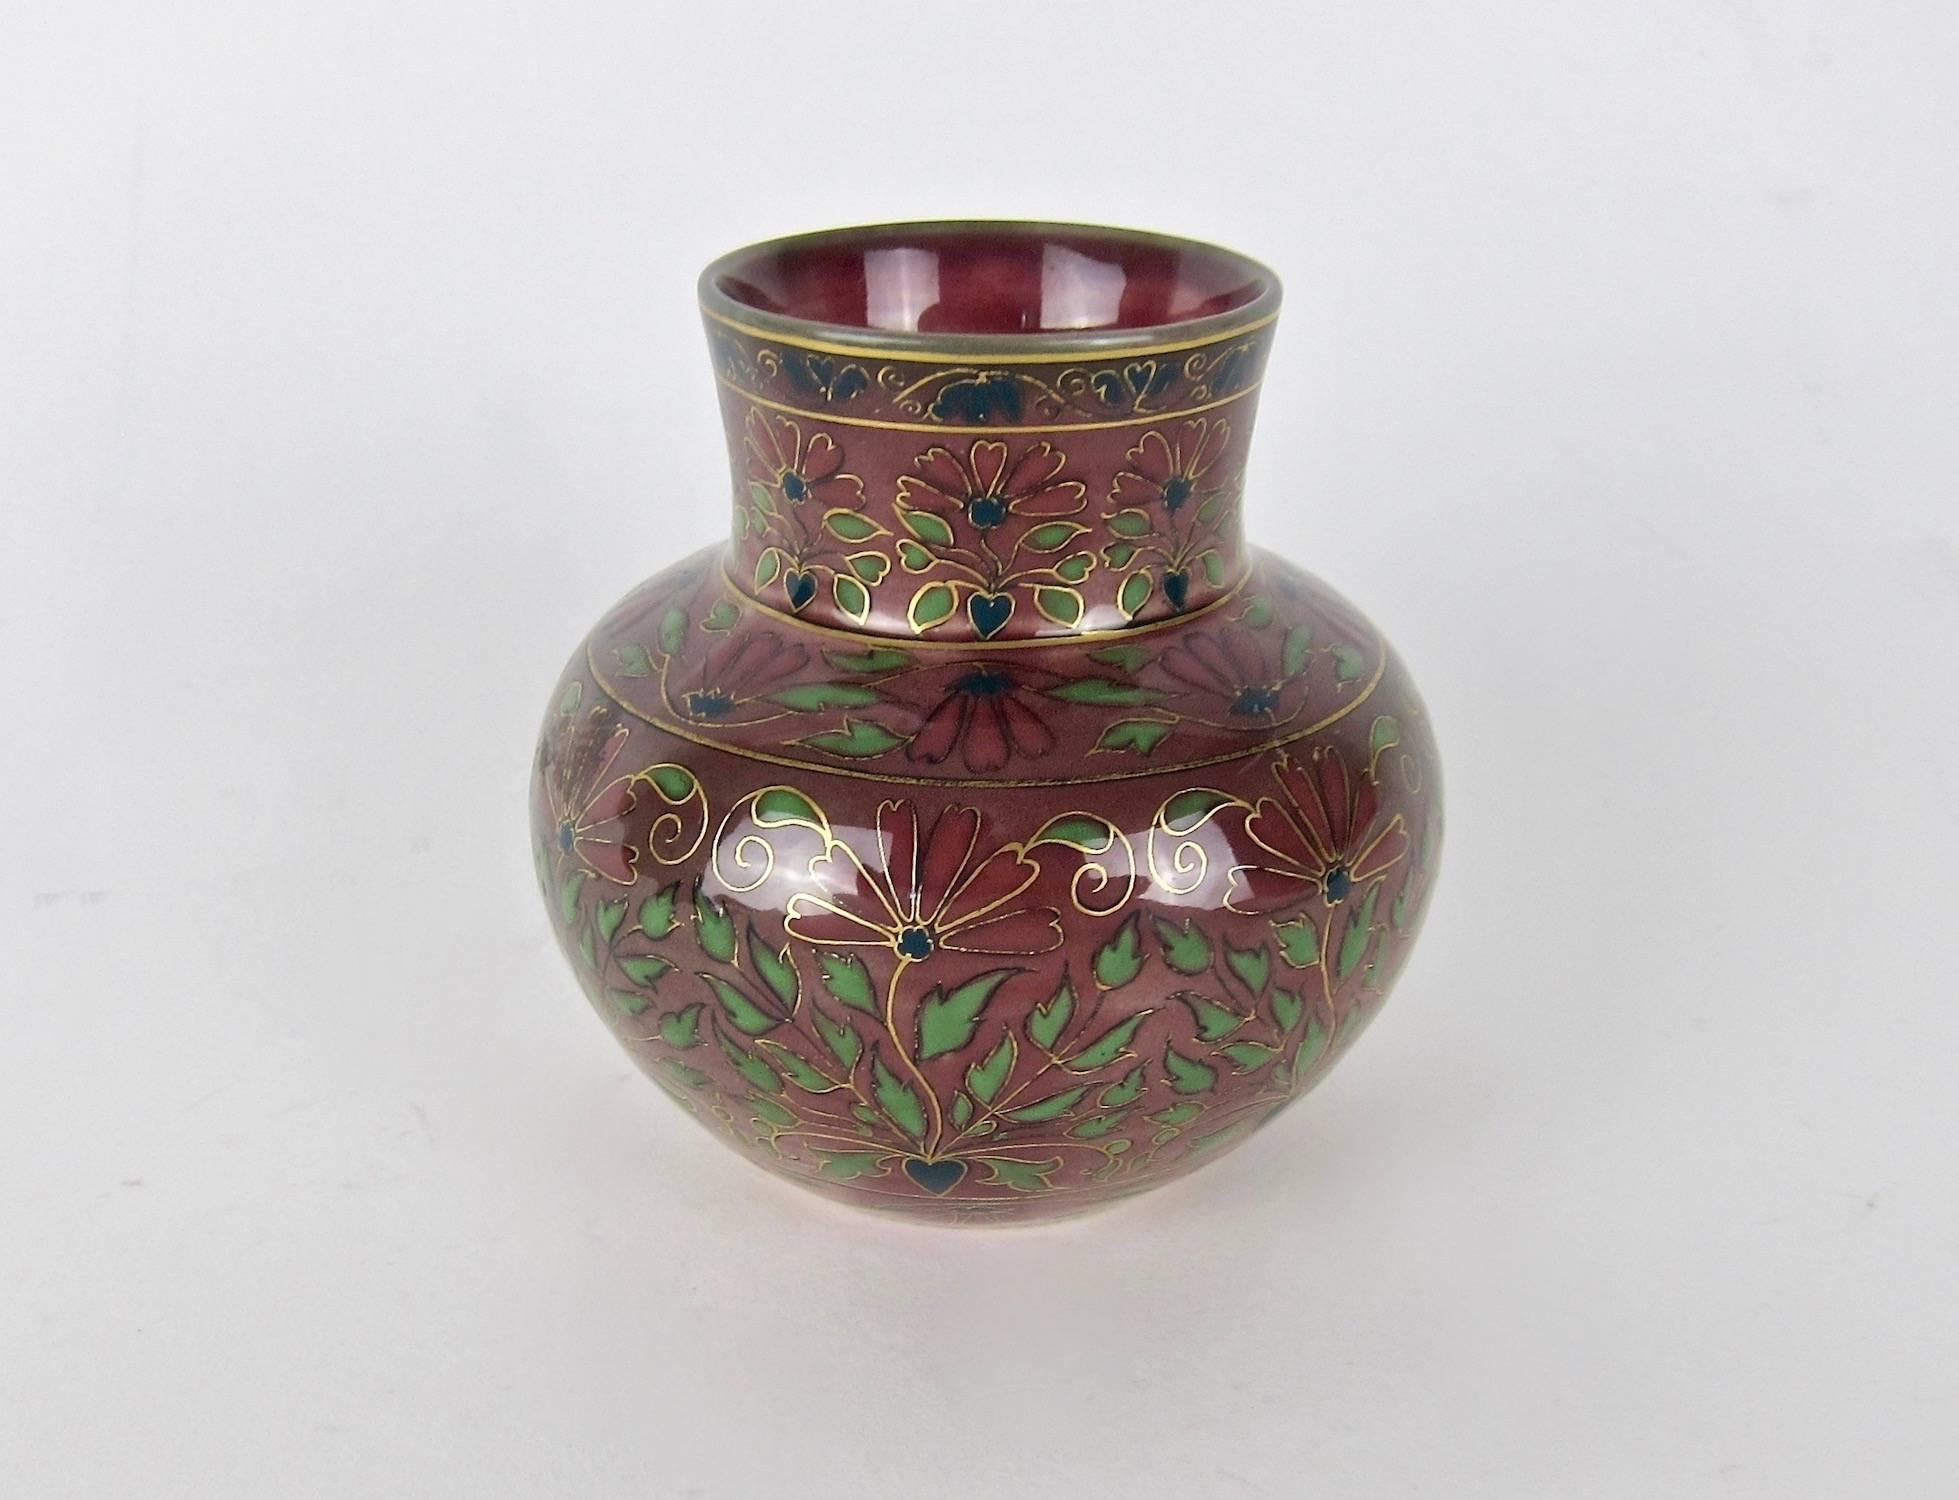 Victorian Zsolnay Pecs Porcelain Faience Vase in Jewel Toned Cloisonne-Style 1